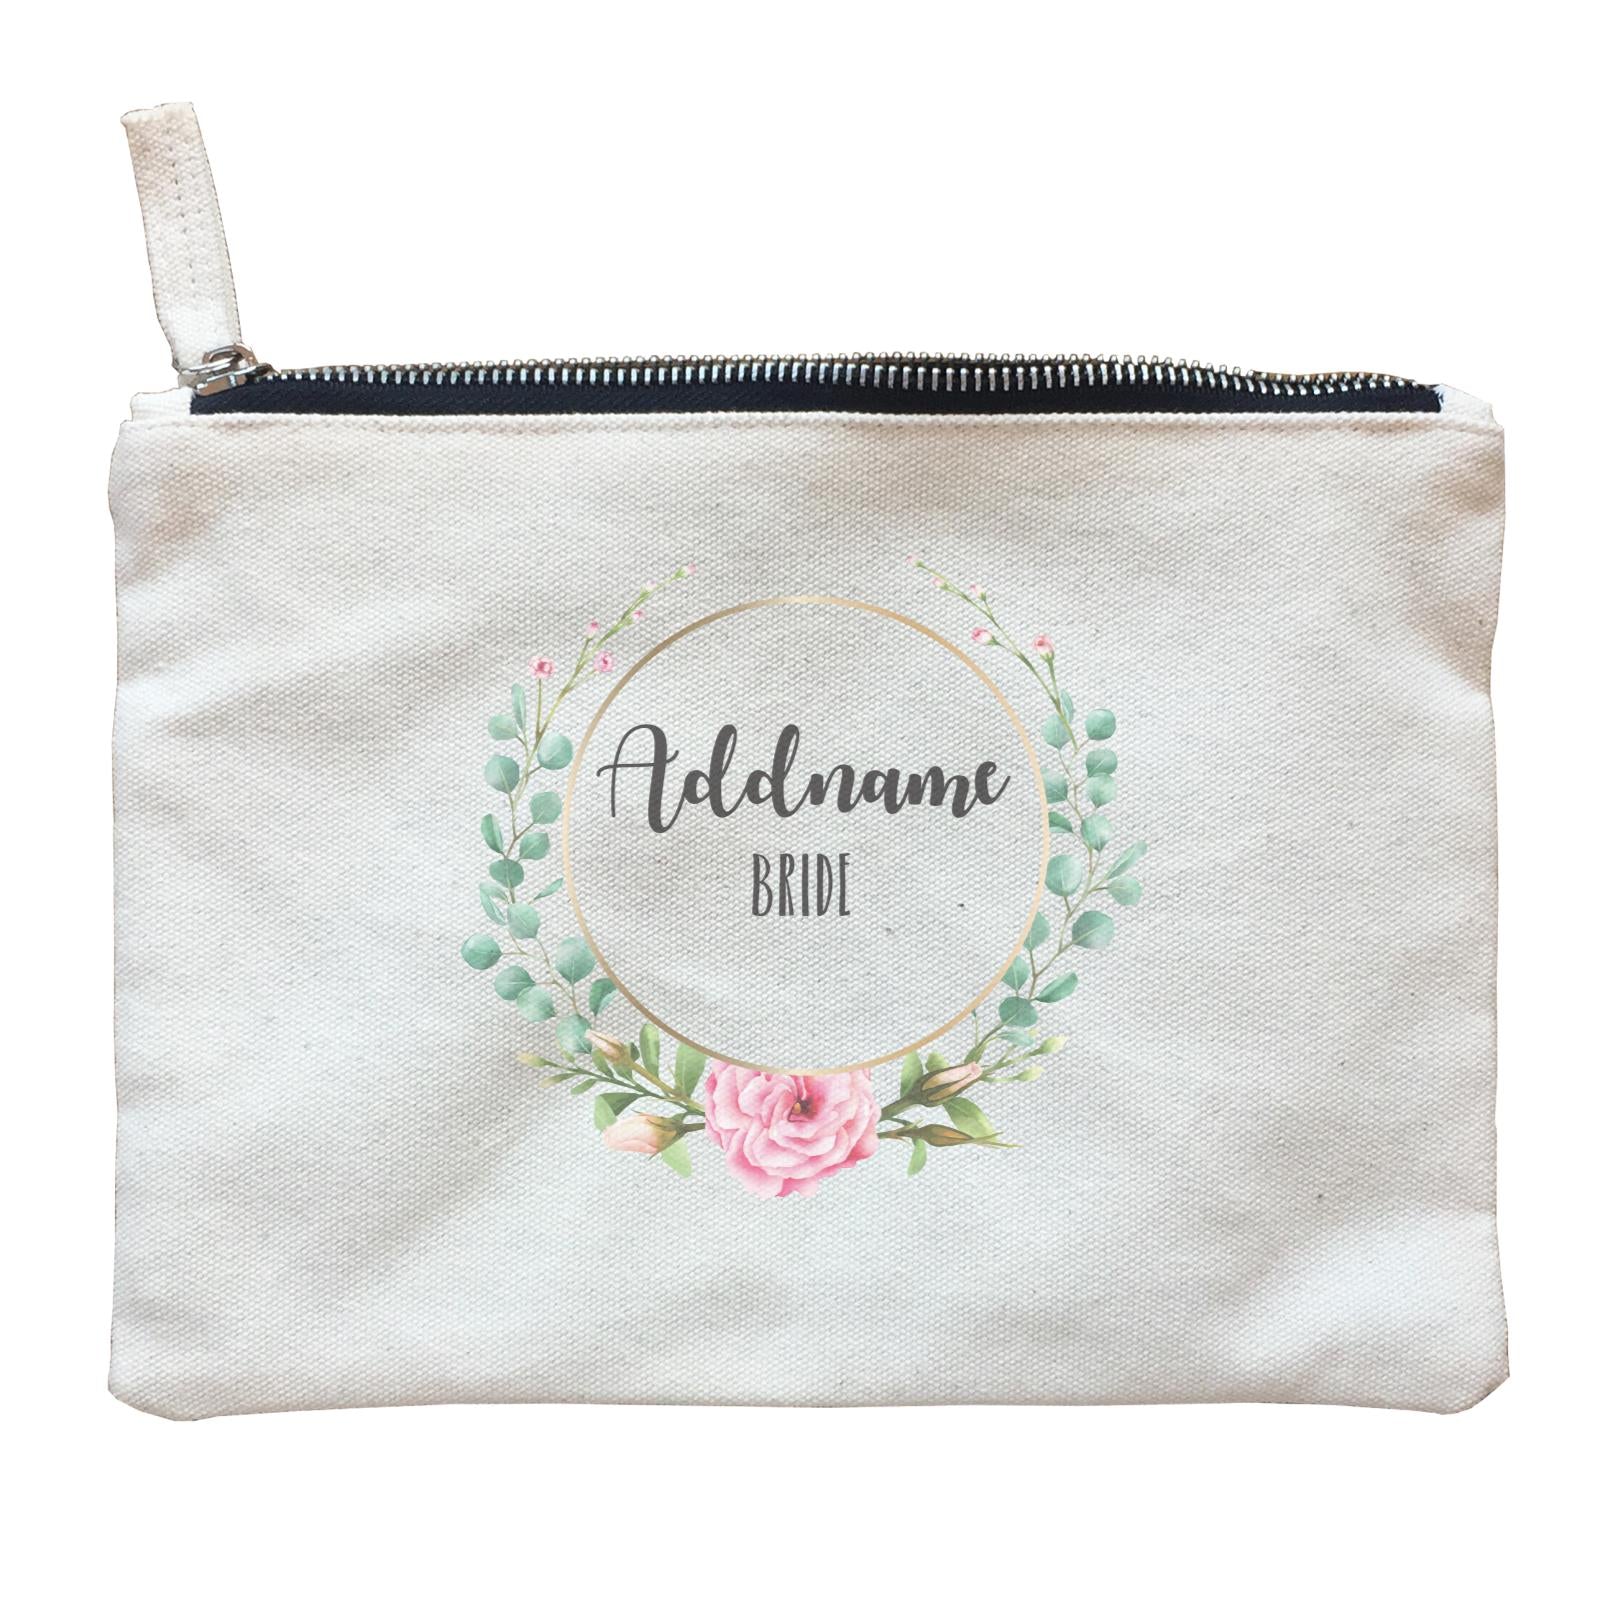 Bridesmaid Floral Modern Pink Flowers With Circle Bride Addname Zipper Pouch